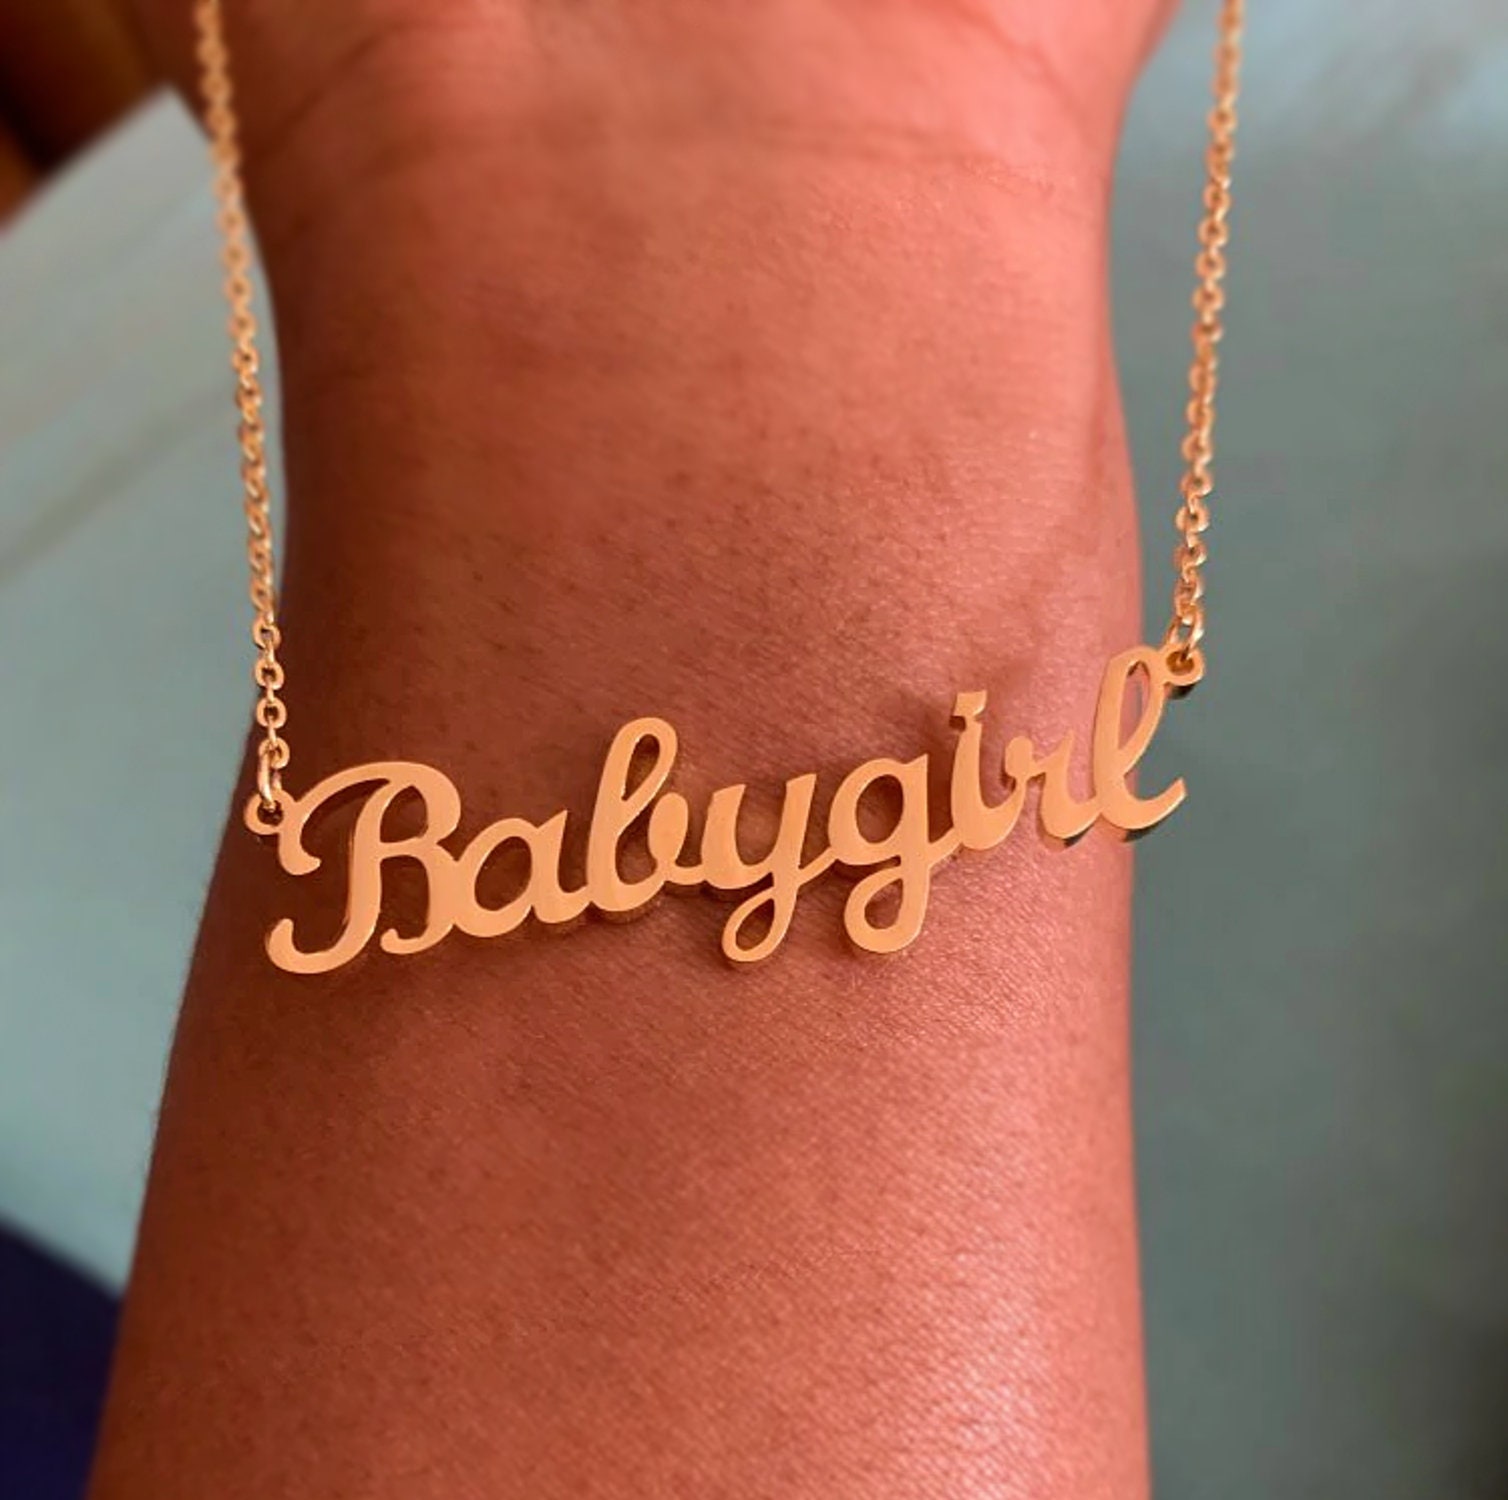 Handmade DHL Babygirl Charm Pendant Necklace Gold Plated Gothic Chain  Jewelry Gift For Girls And Women From Topwholesalerno2, $0.76 | DHgate.Com